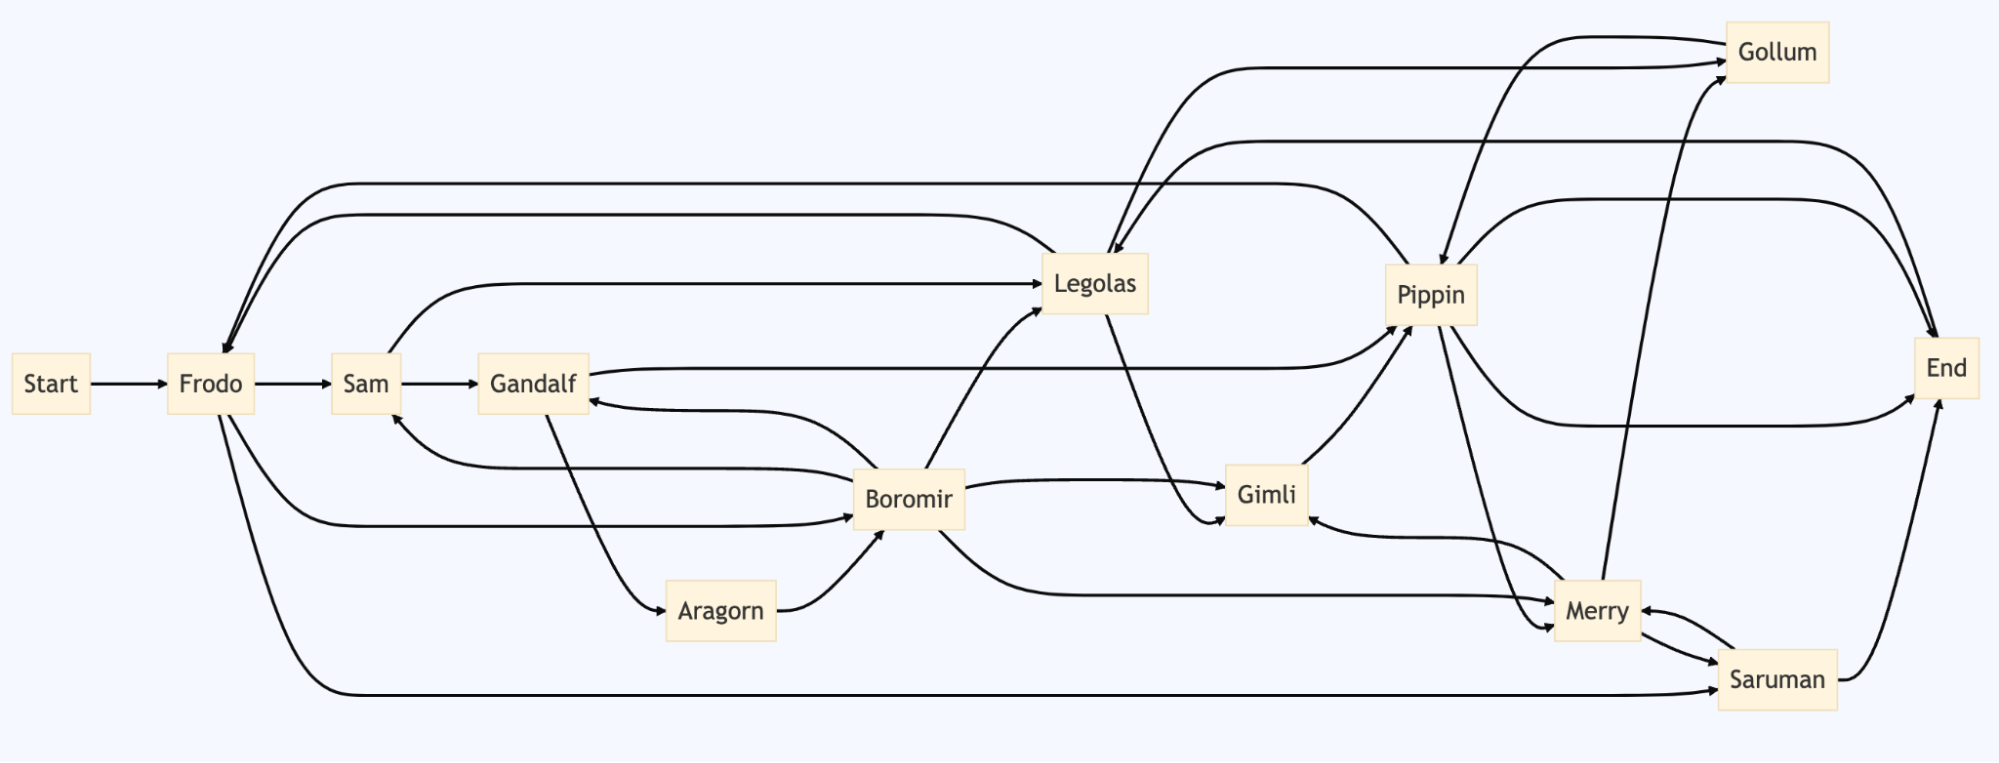 Example of a flowchart with a low number of nodes that are complex due to a high number of edges.